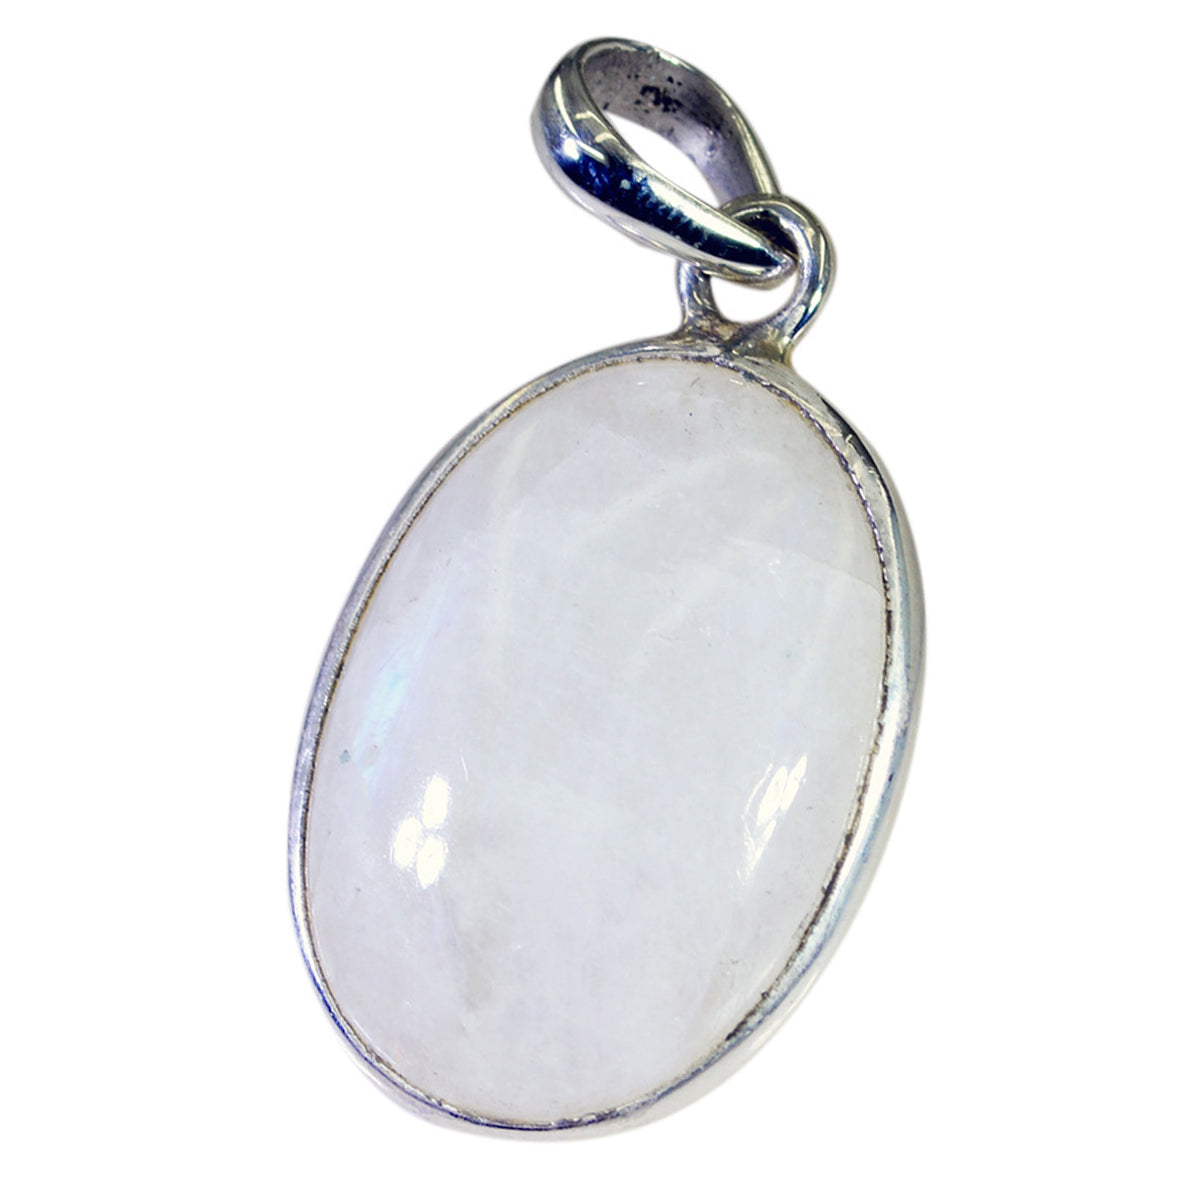 Riyo Graceful Gems Oval Cabochon White Rainbow Moonstone Silver Pendant Gift For Boxing Day